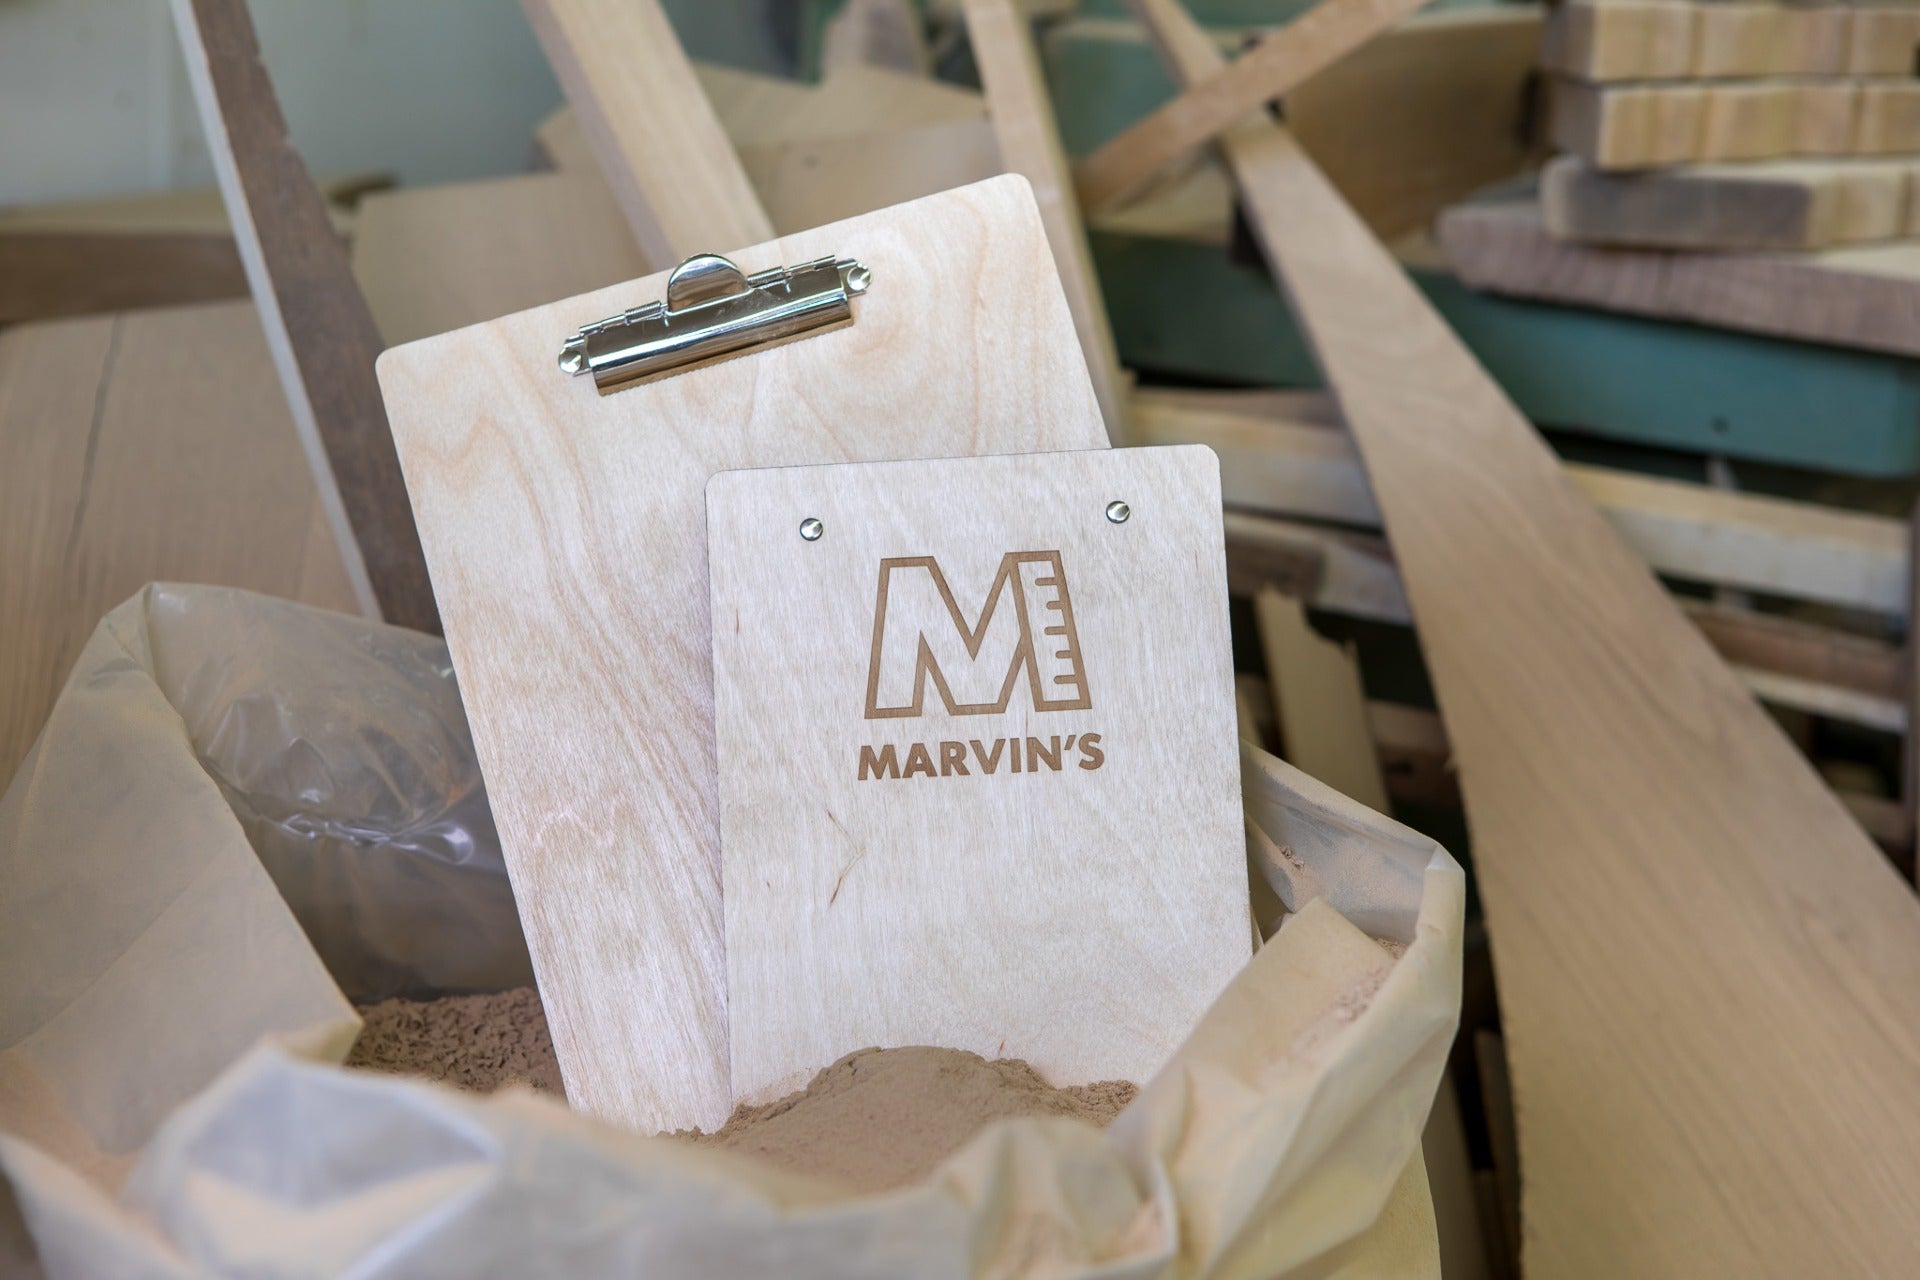 Engraving in glass and wood | Marvin's,